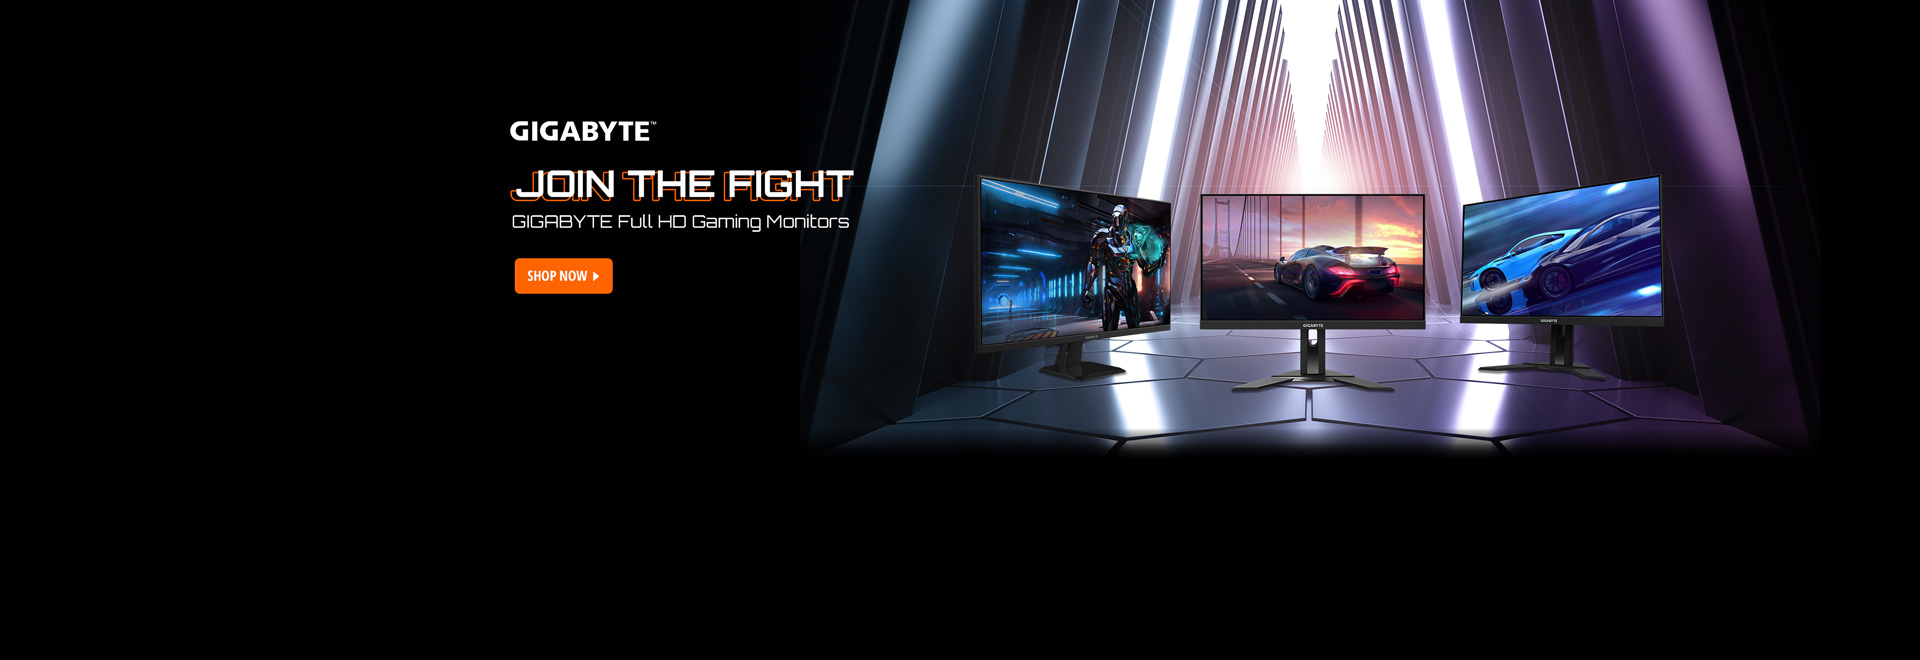 Join the Fight: Gigabyte Full HD Gaming Monitors